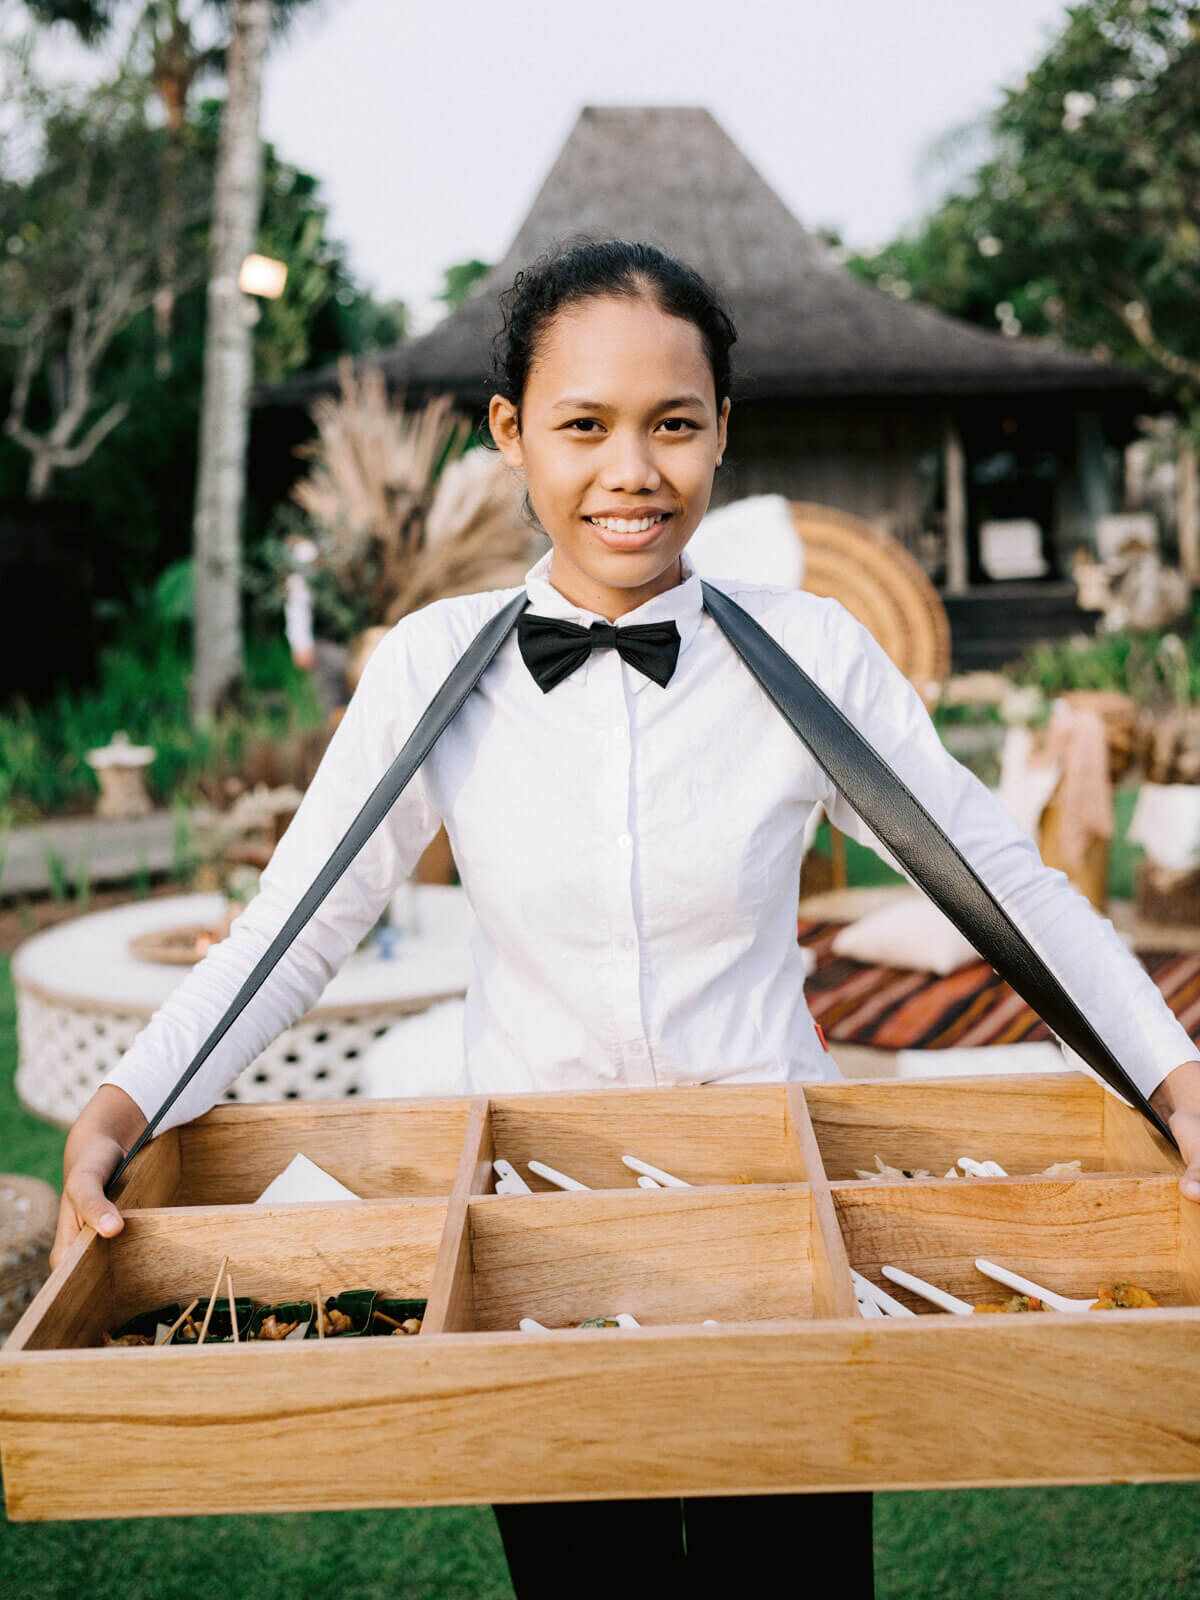 The service crew is holding a wooden tray of refreshments in a wedding in Khayangan Estate, Bali, Indonesia. Image by Jenny Fu Studio